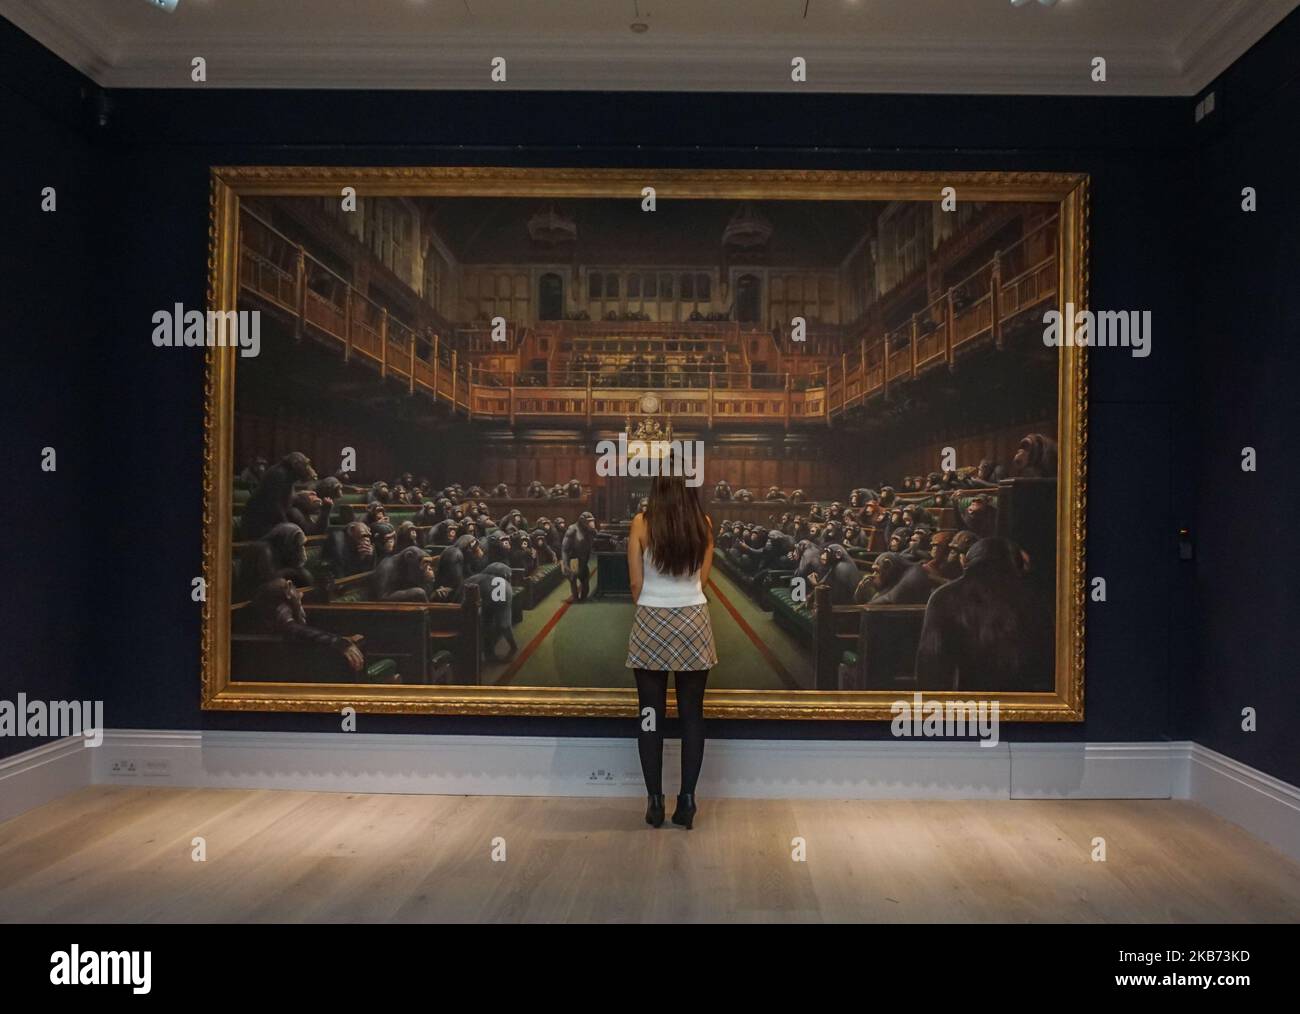 A gallery worker poses with the Banksy painting 'Devolved Parliament' at Sotheby's on September 27, 2019 in London, England. Photo call for Banksy's Devolved Parliament painting ahead of it being offered at auction by Sotheby's. The artwork showing the House of Commons full of chimpanzees is expected to fetch GBP1.5 to GBP2 million. (Photo by Giannis Alexopoulos/NurPhoto) Stock Photo